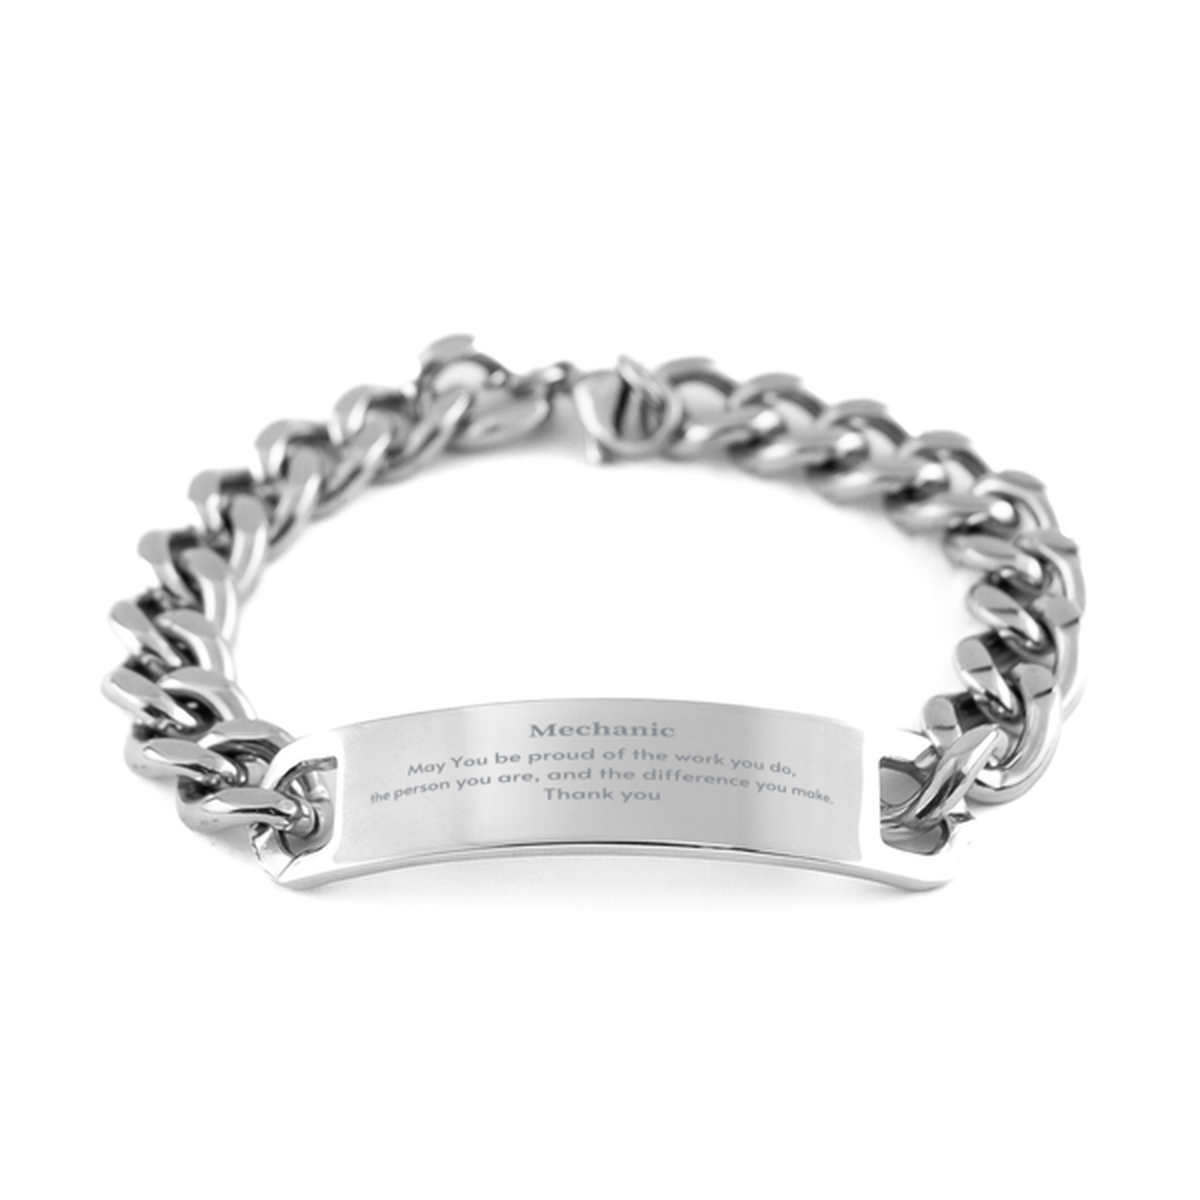 Heartwarming Cuban Chain Stainless Steel Bracelet Retirement Coworkers Gifts for Mechanic, Mechanic May You be proud of the work you do, the person you are Gifts for Boss Men Women Friends